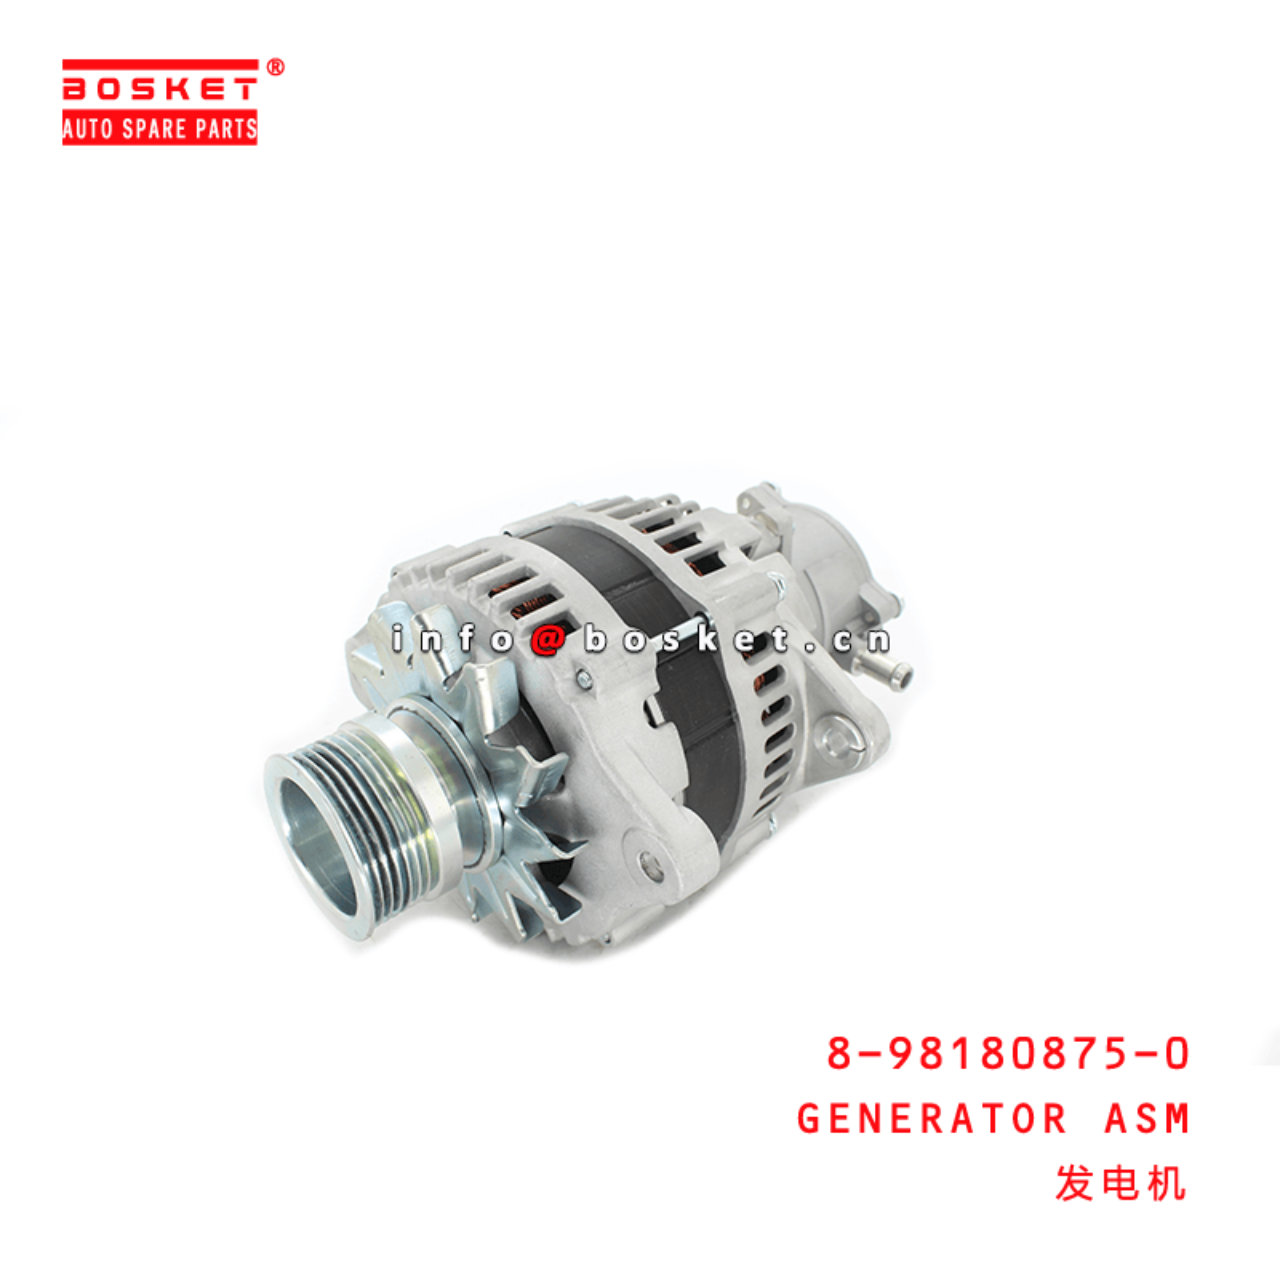 8-98180875-0 Generator Assembly Suitable for ISUZU NQR 4HK1 